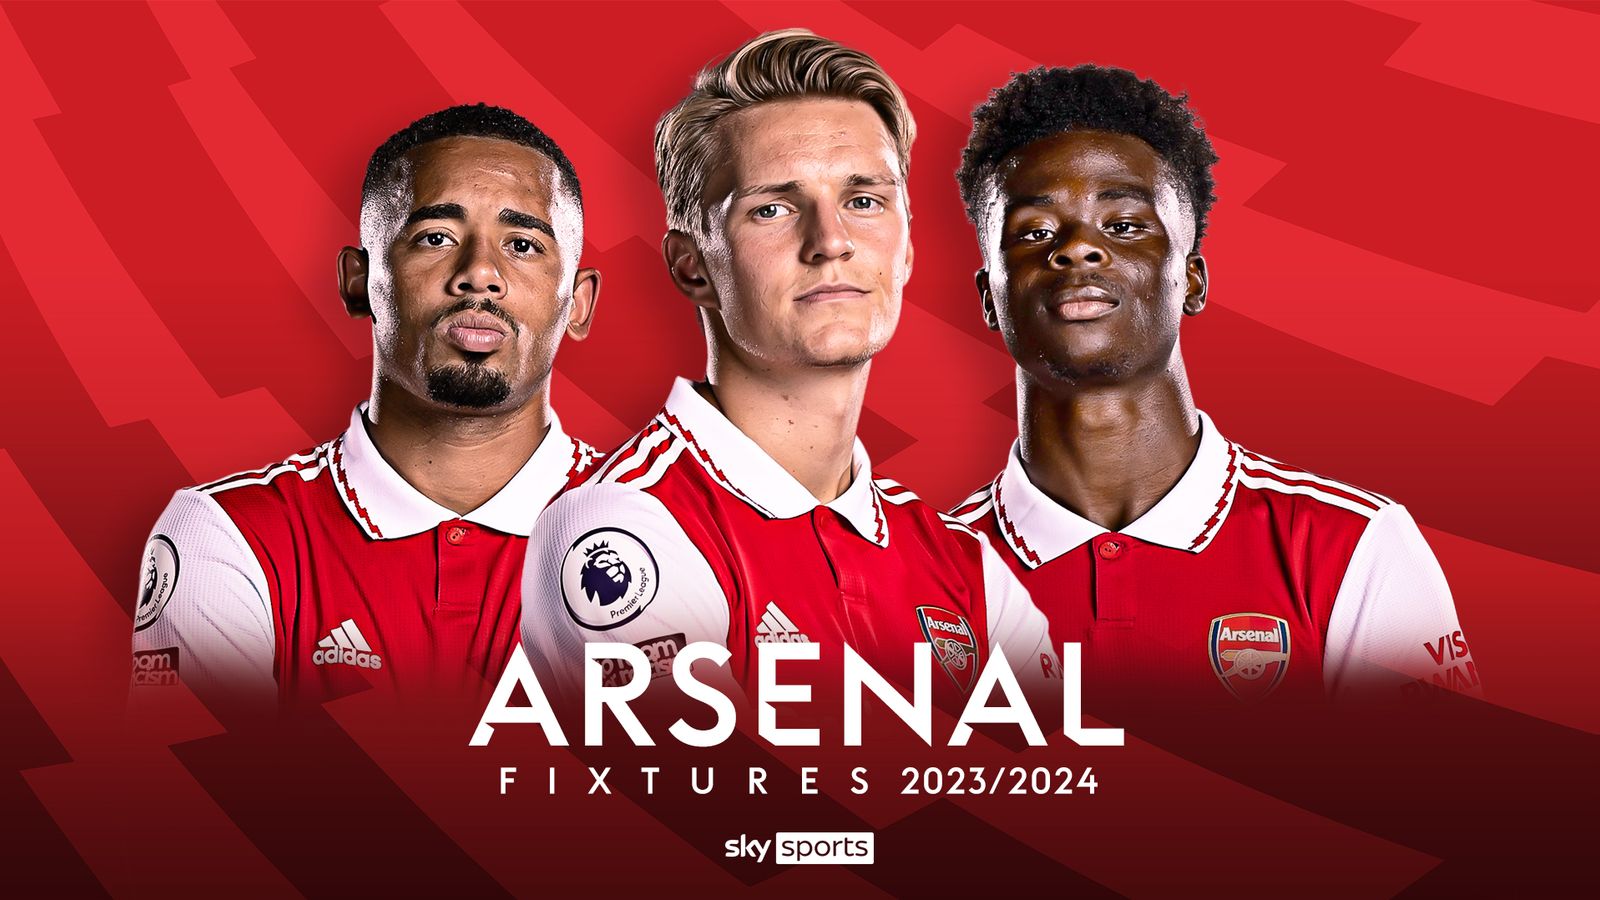 Arsenal 2023 2024 Premier League Schedule: Calendar of all 38 gunners games  with date, time, opponent, stadiums, game plan sheets and space for notes